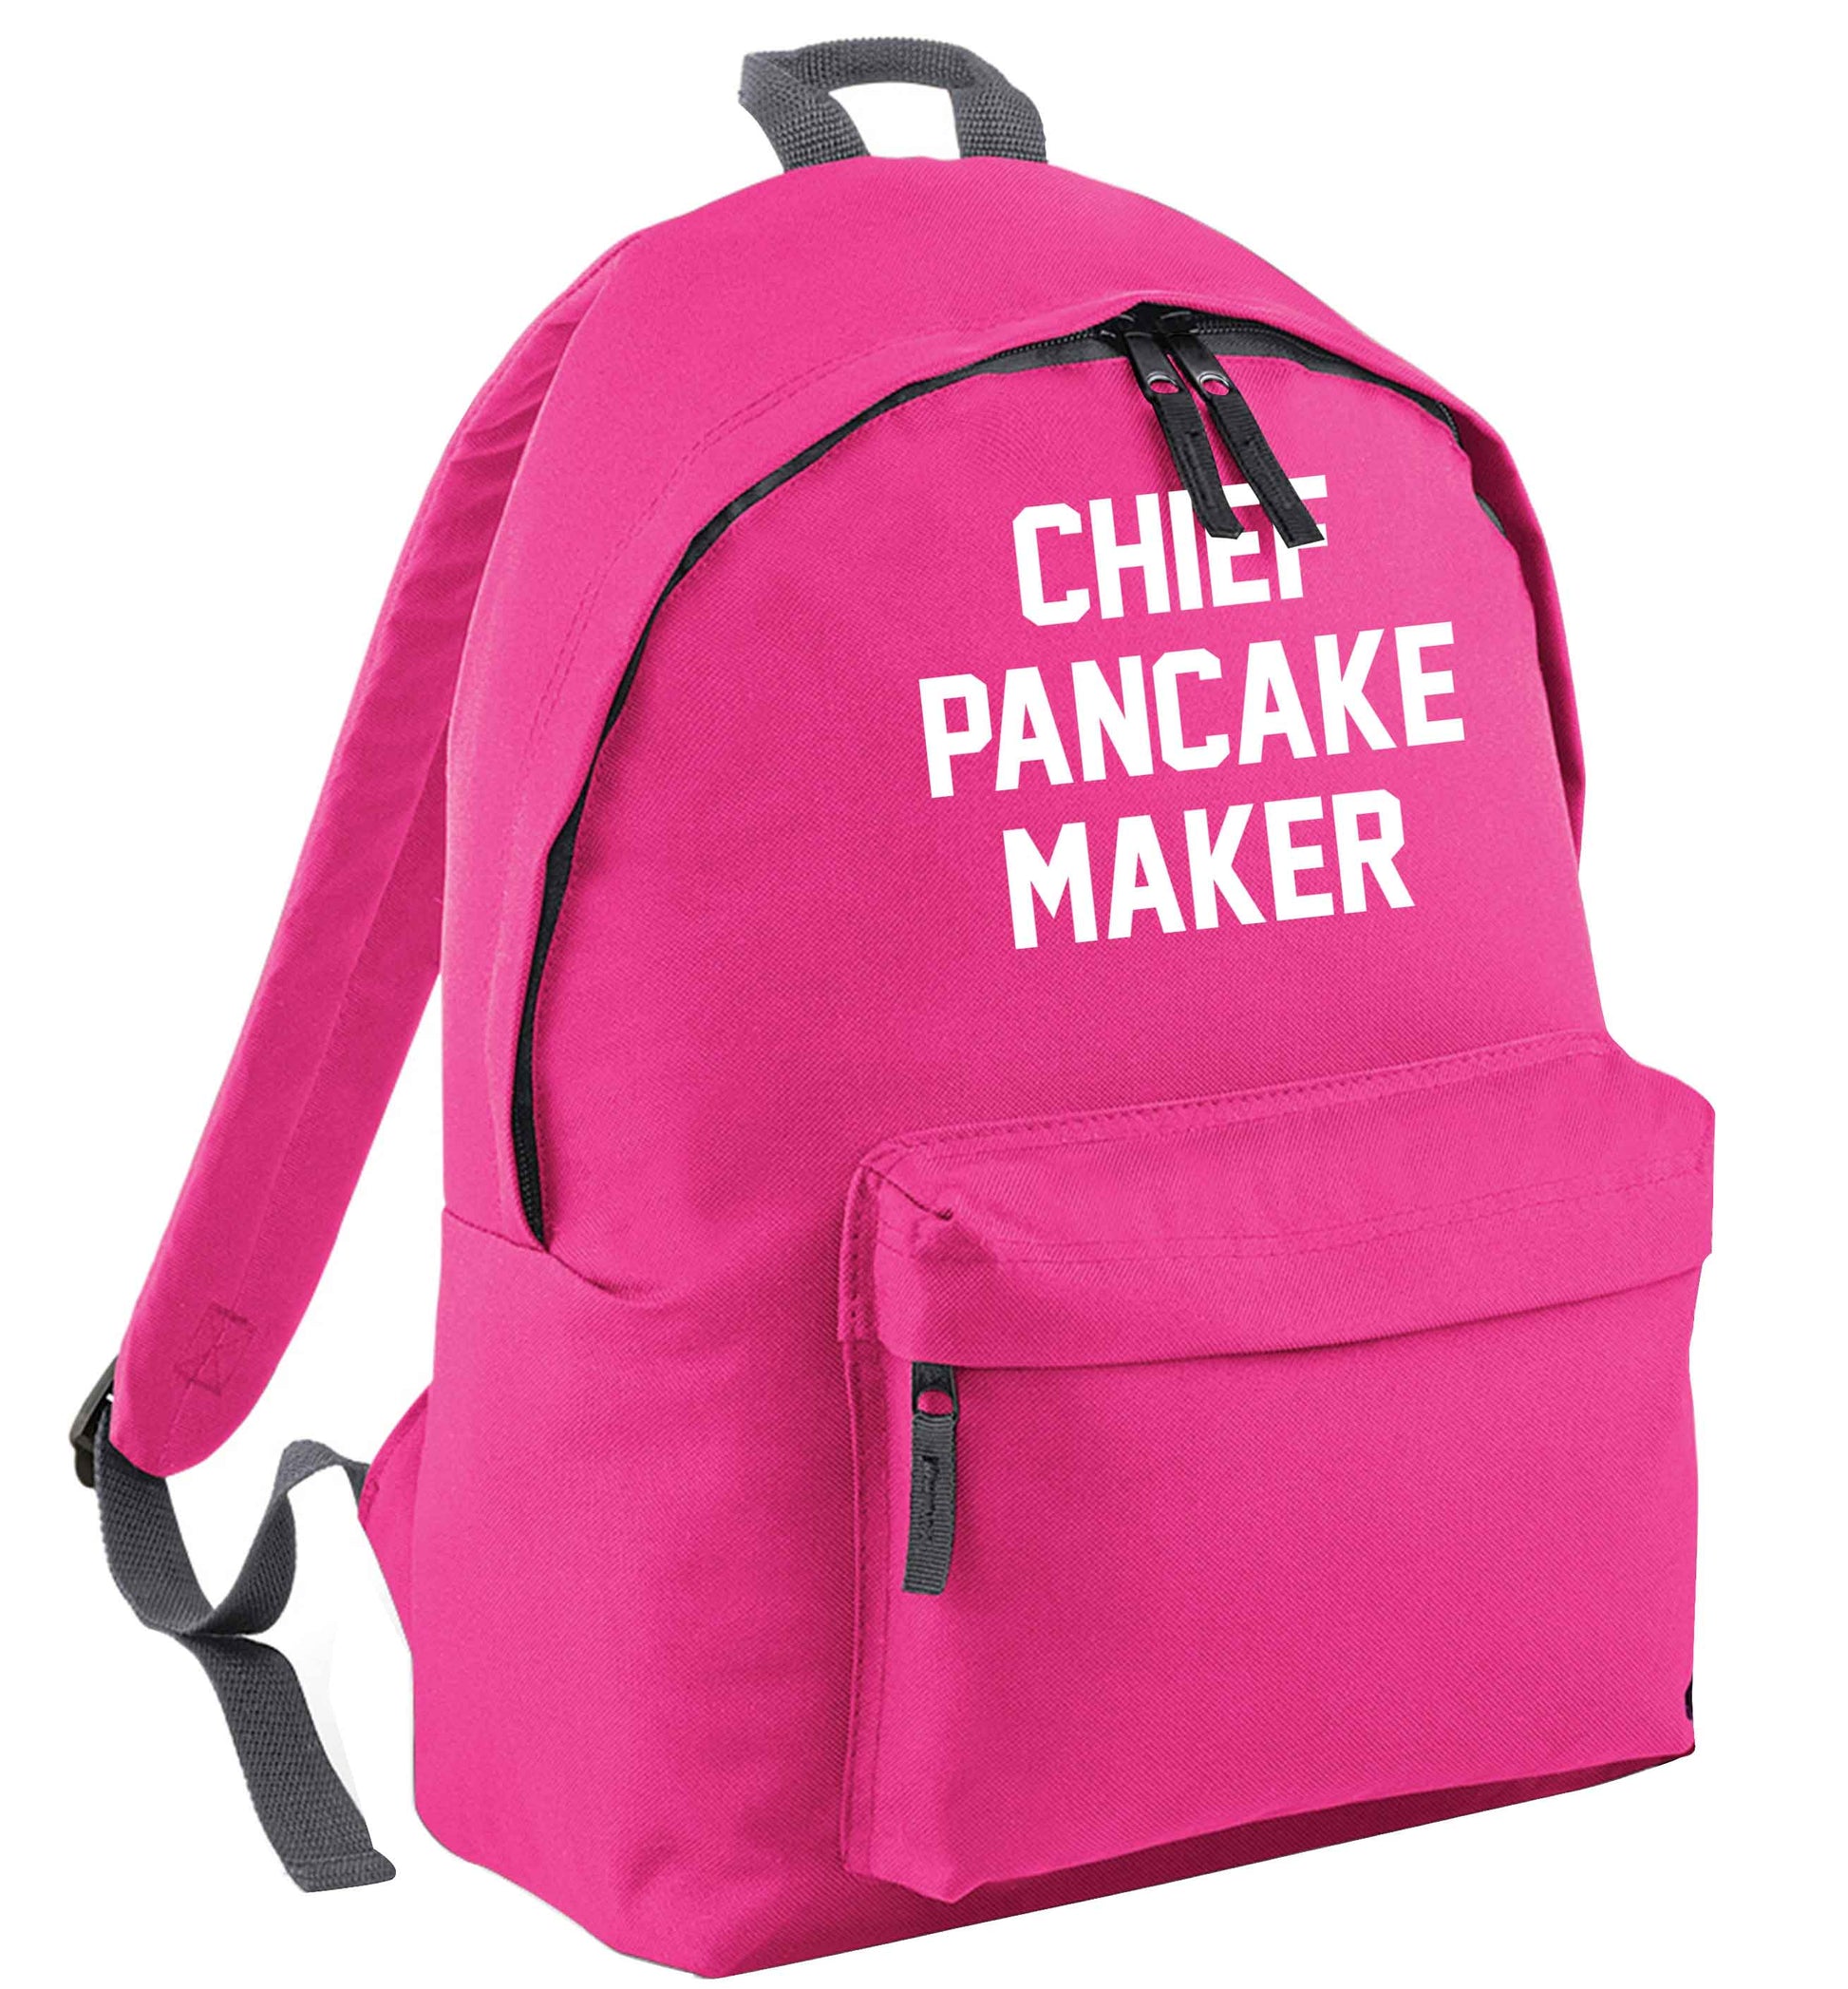 Chief pancake maker pink childrens backpack